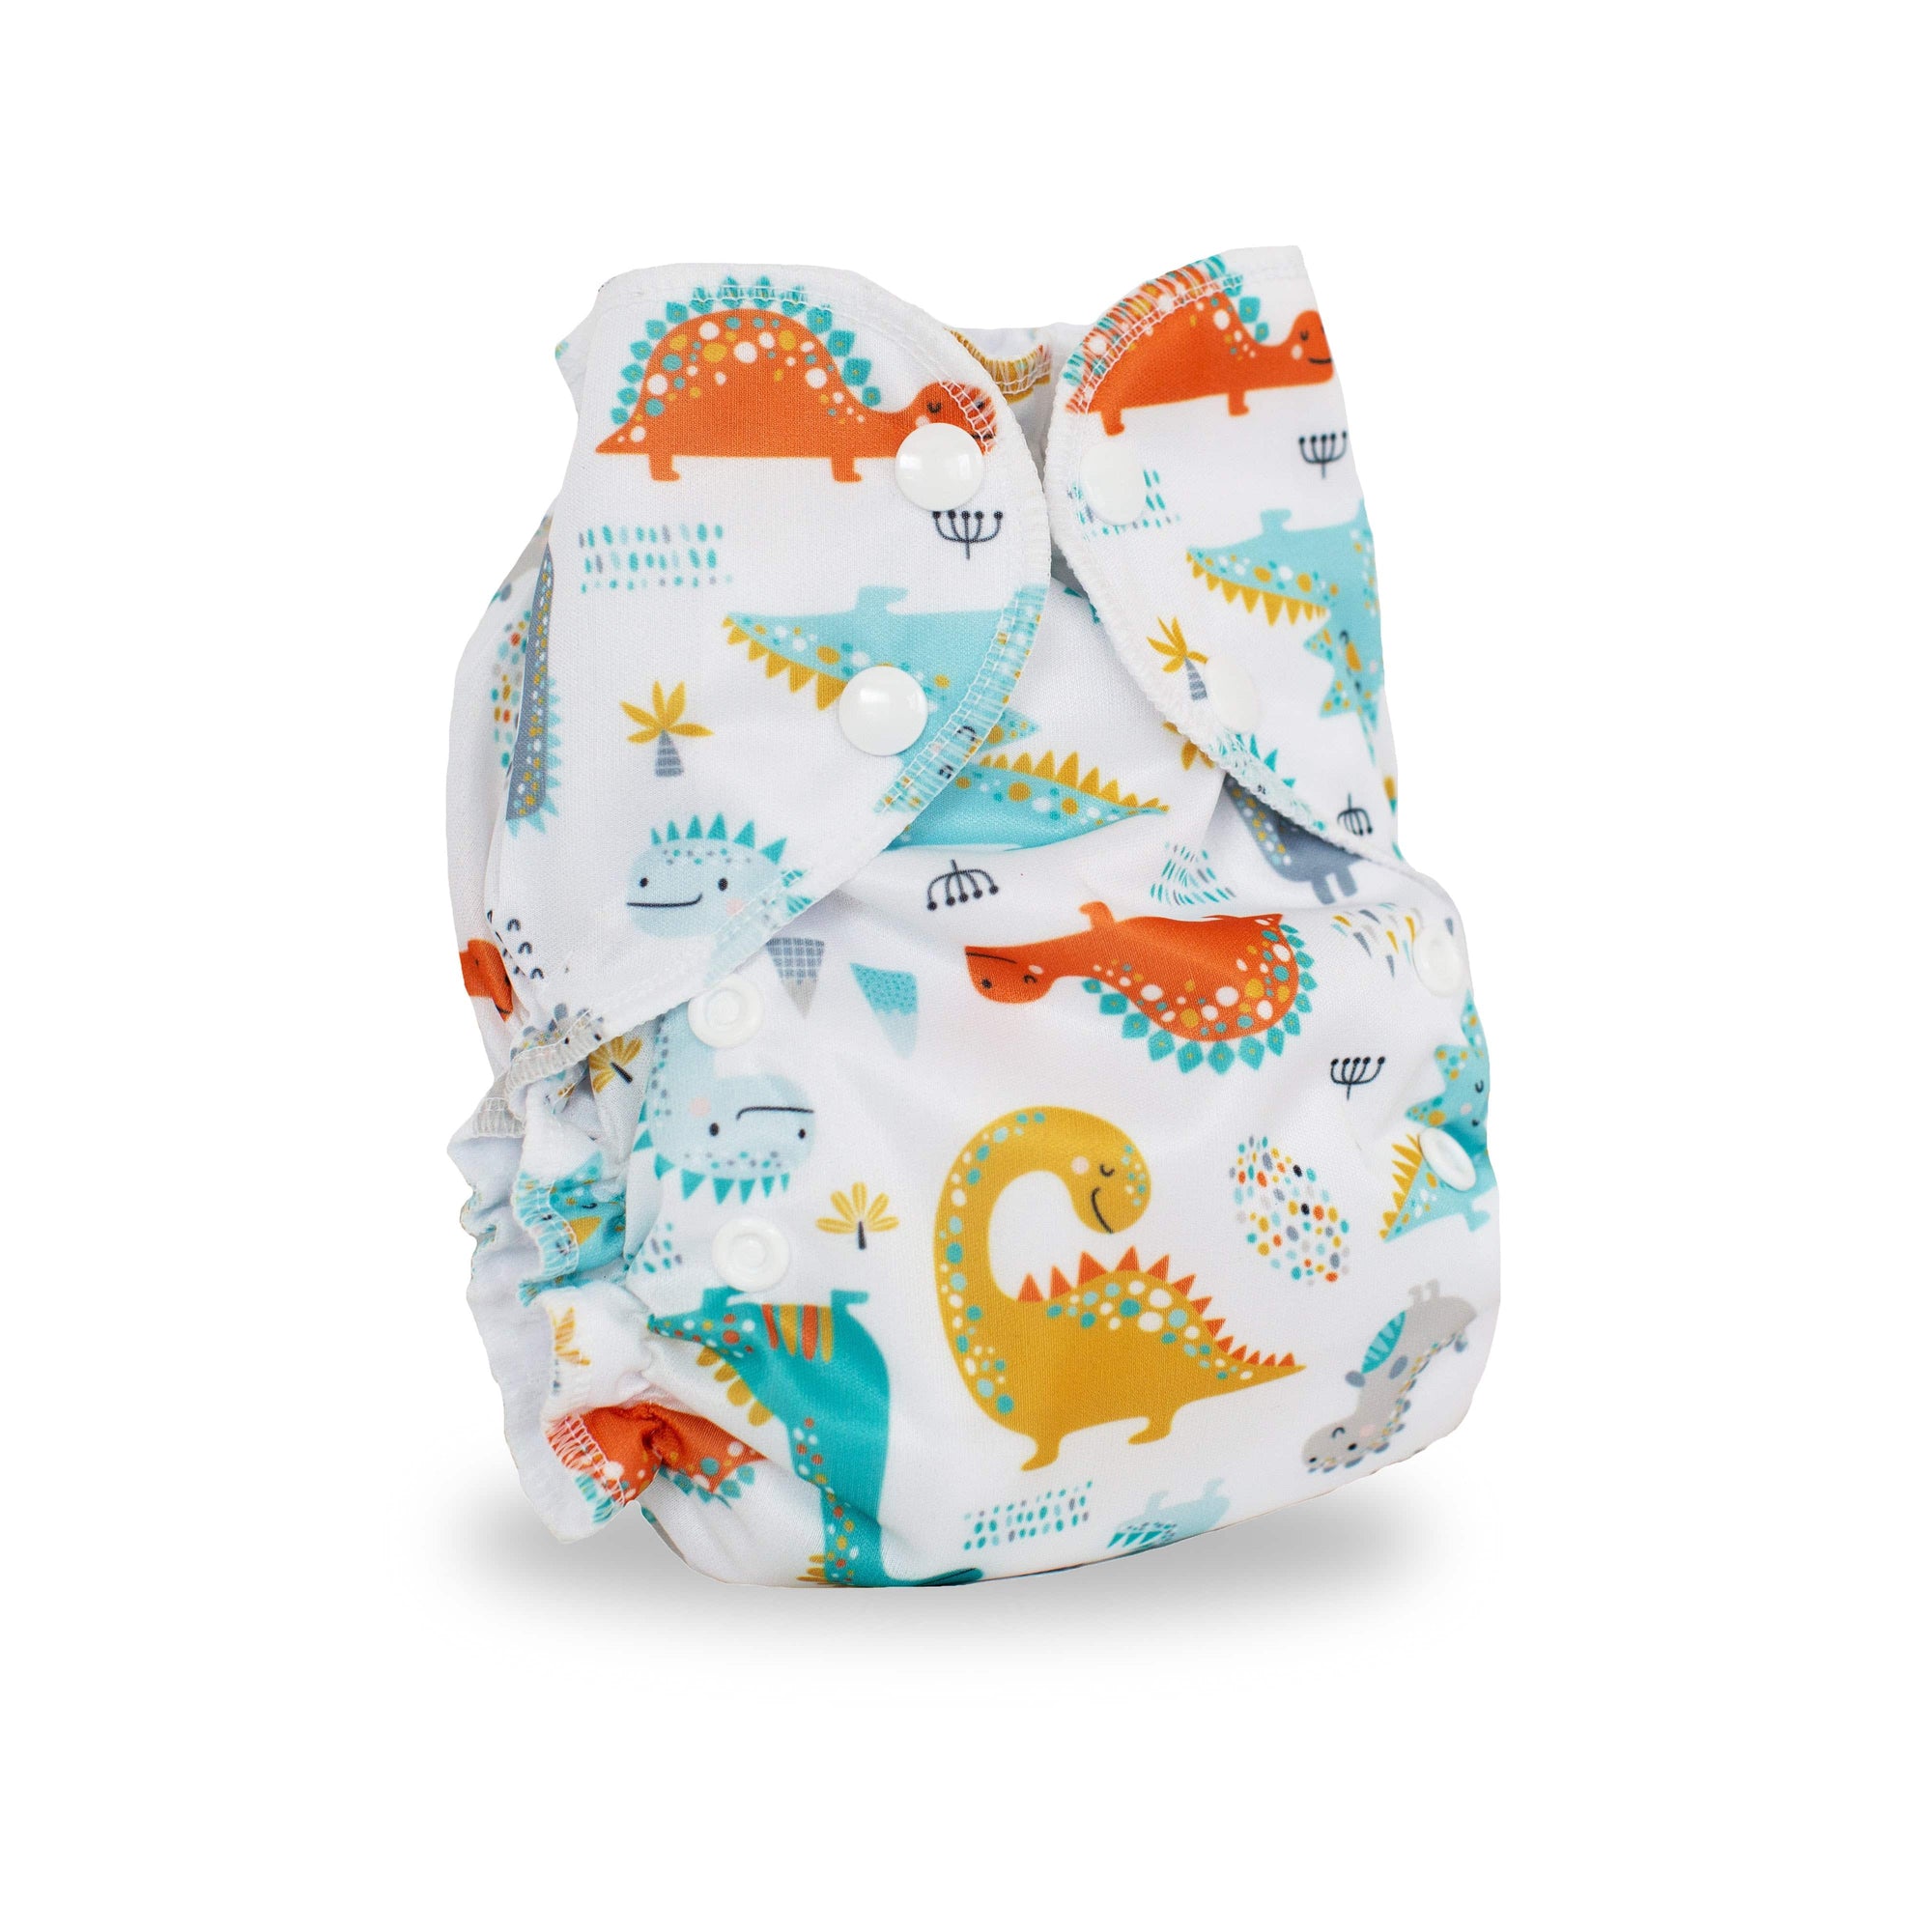 AMP Diapers cloth diaper AMP Diapers One Size Duo Pocket Diaper - Dinos